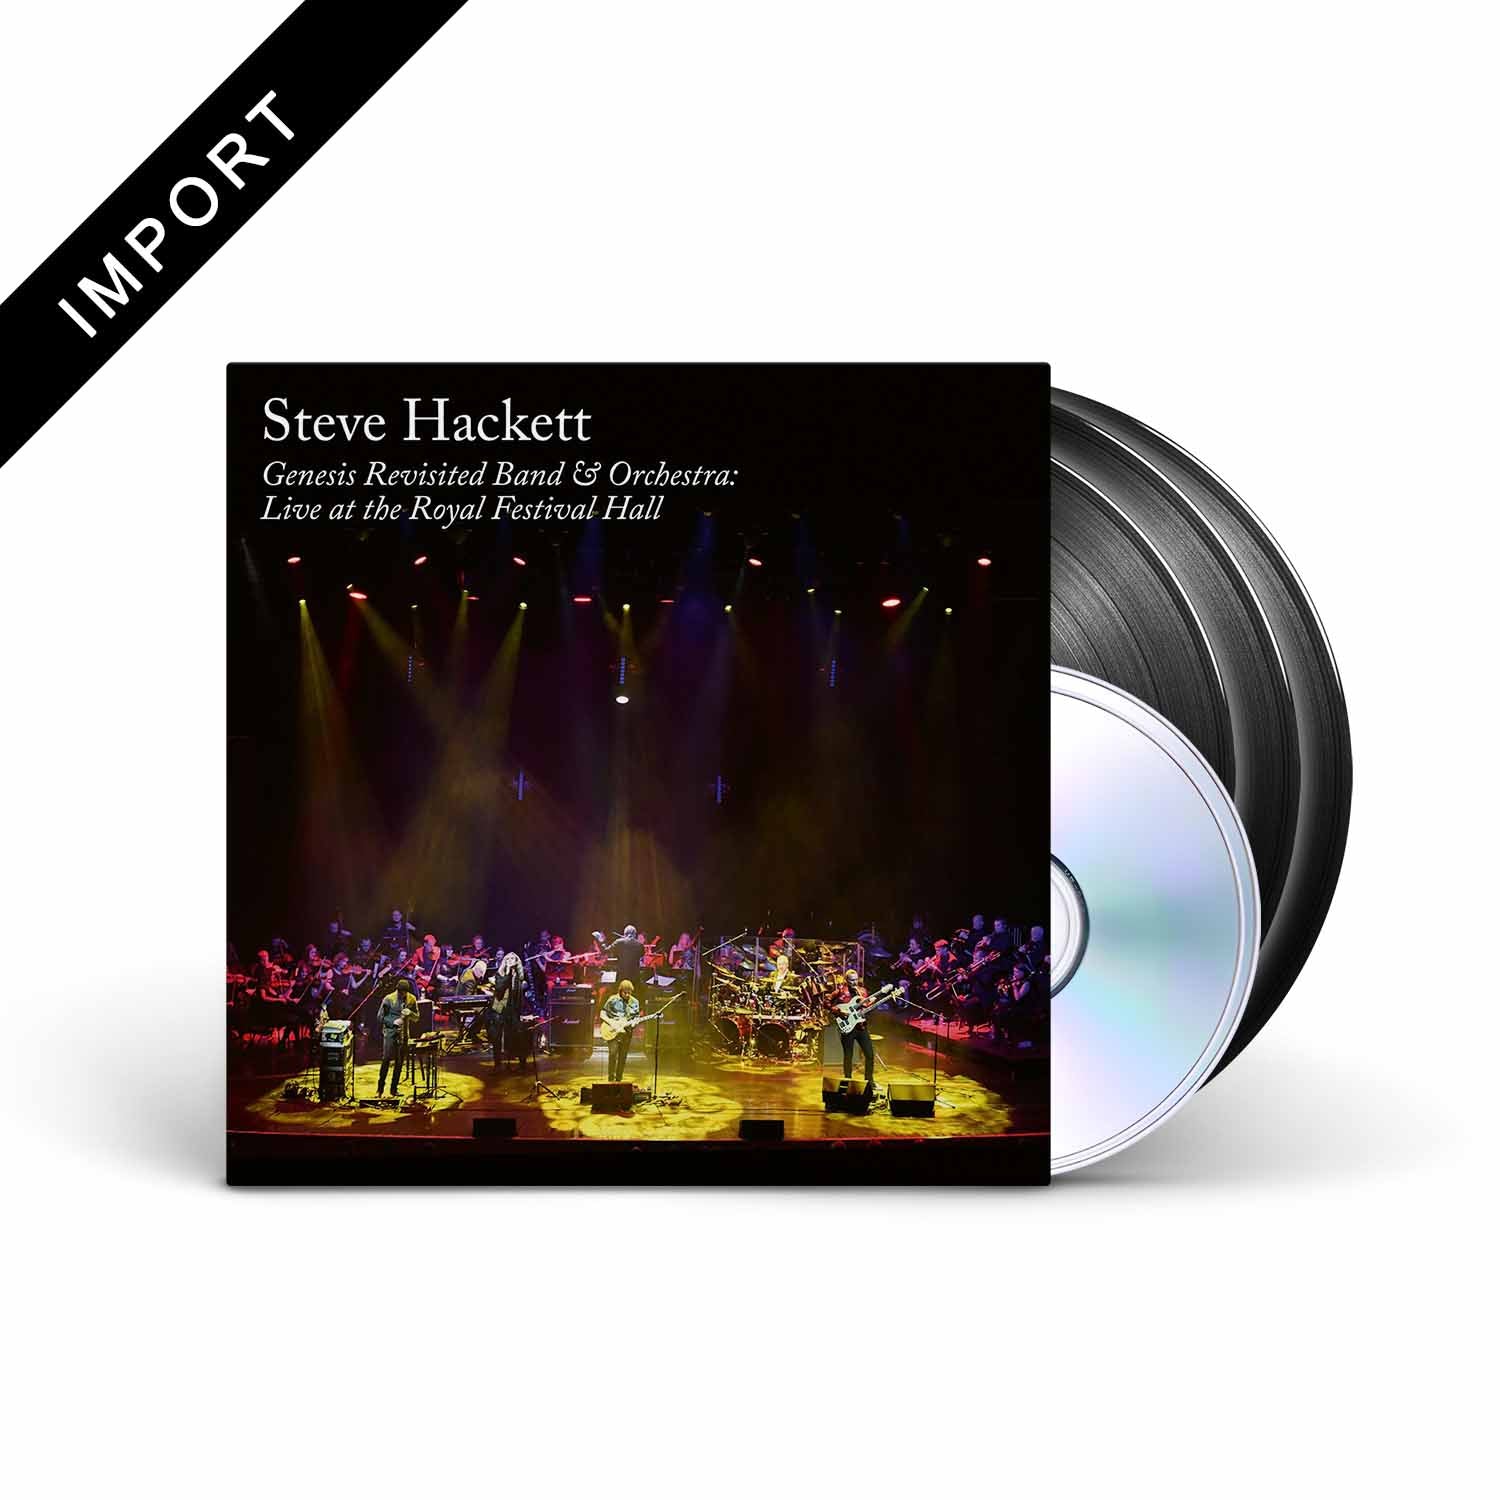 STEVE HACKETT - Genesis Revisited Band & Orchestra: Live (Vinyl Re-issue 2022) - 3xLP + 2CD